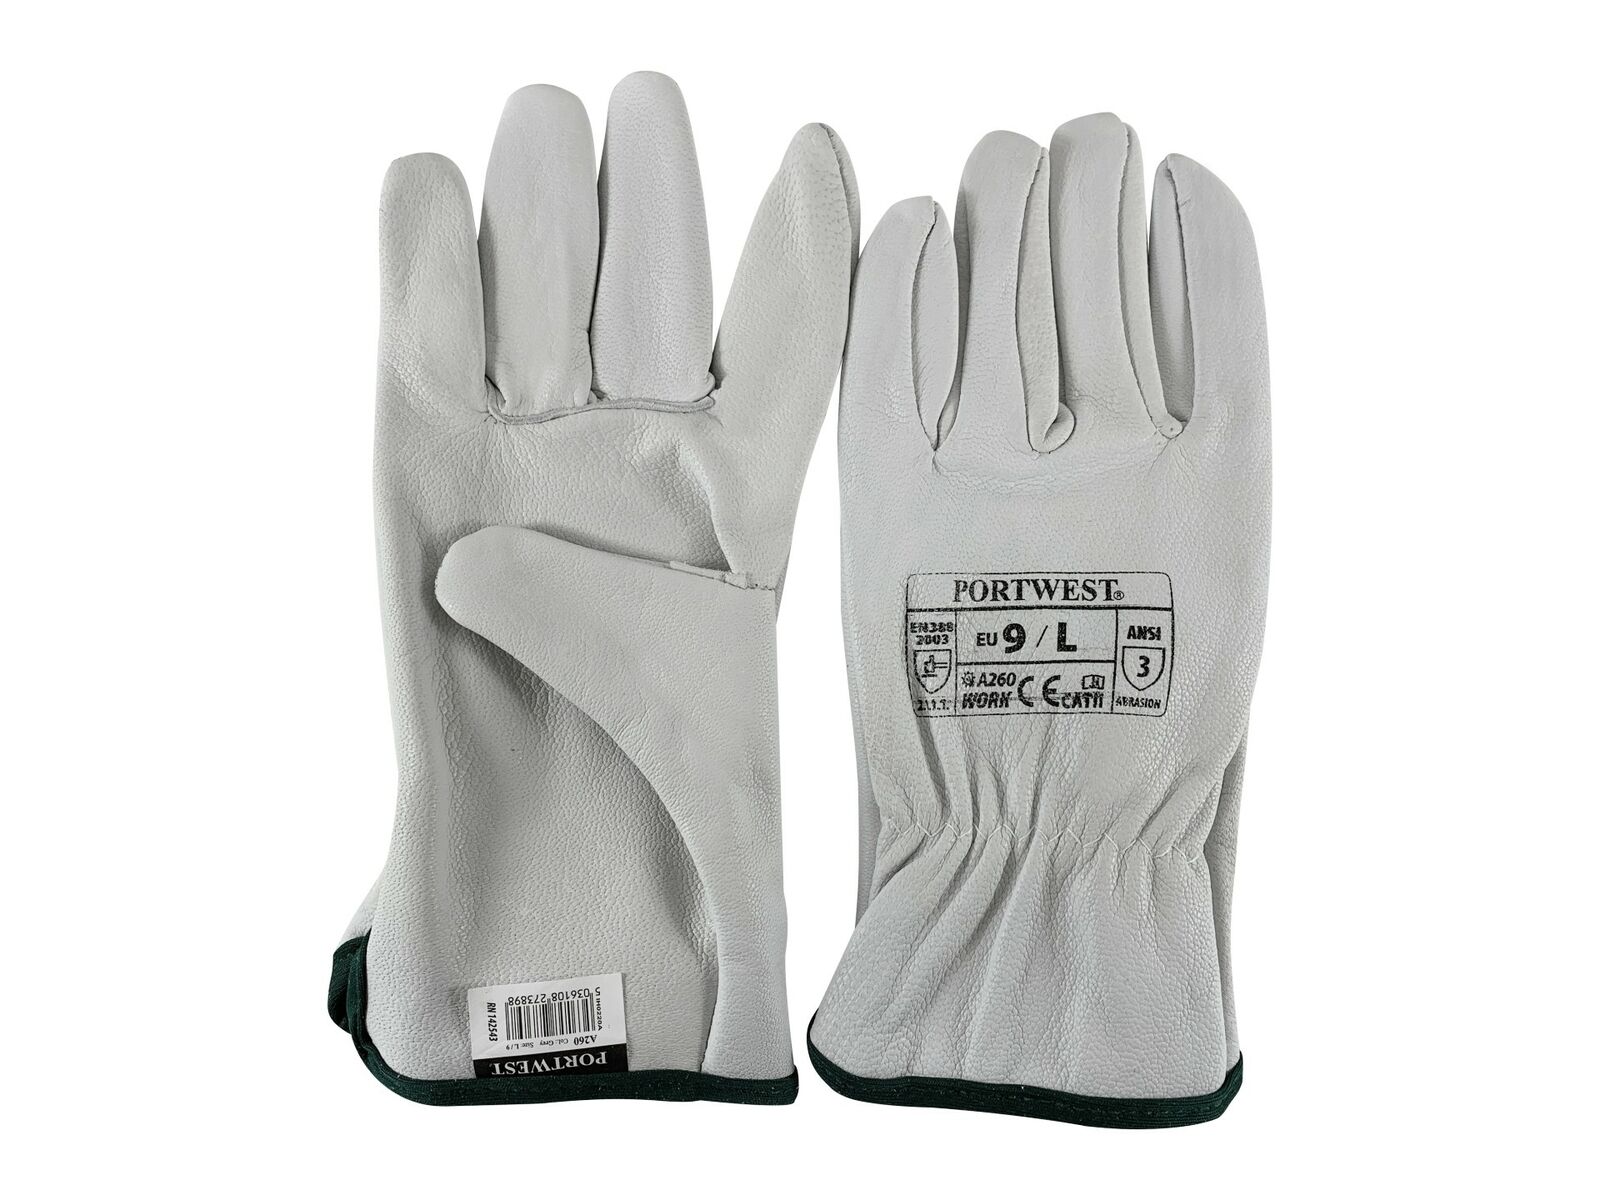 Portwest A260 Leather Gardening Gloves 